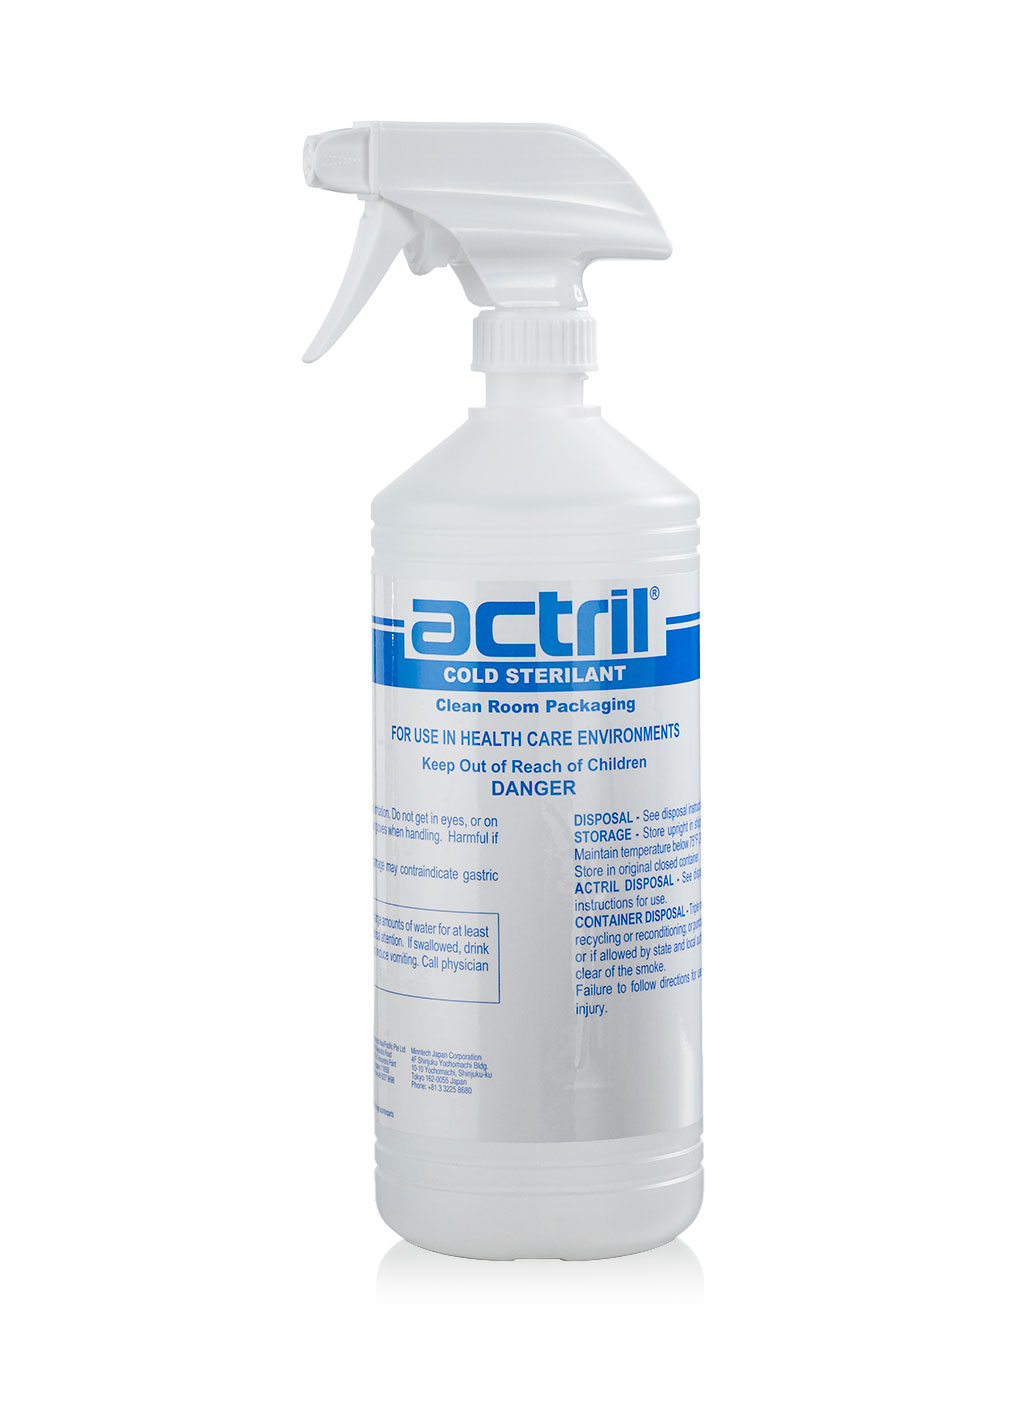 Spray bottle of medical surface disinfectant